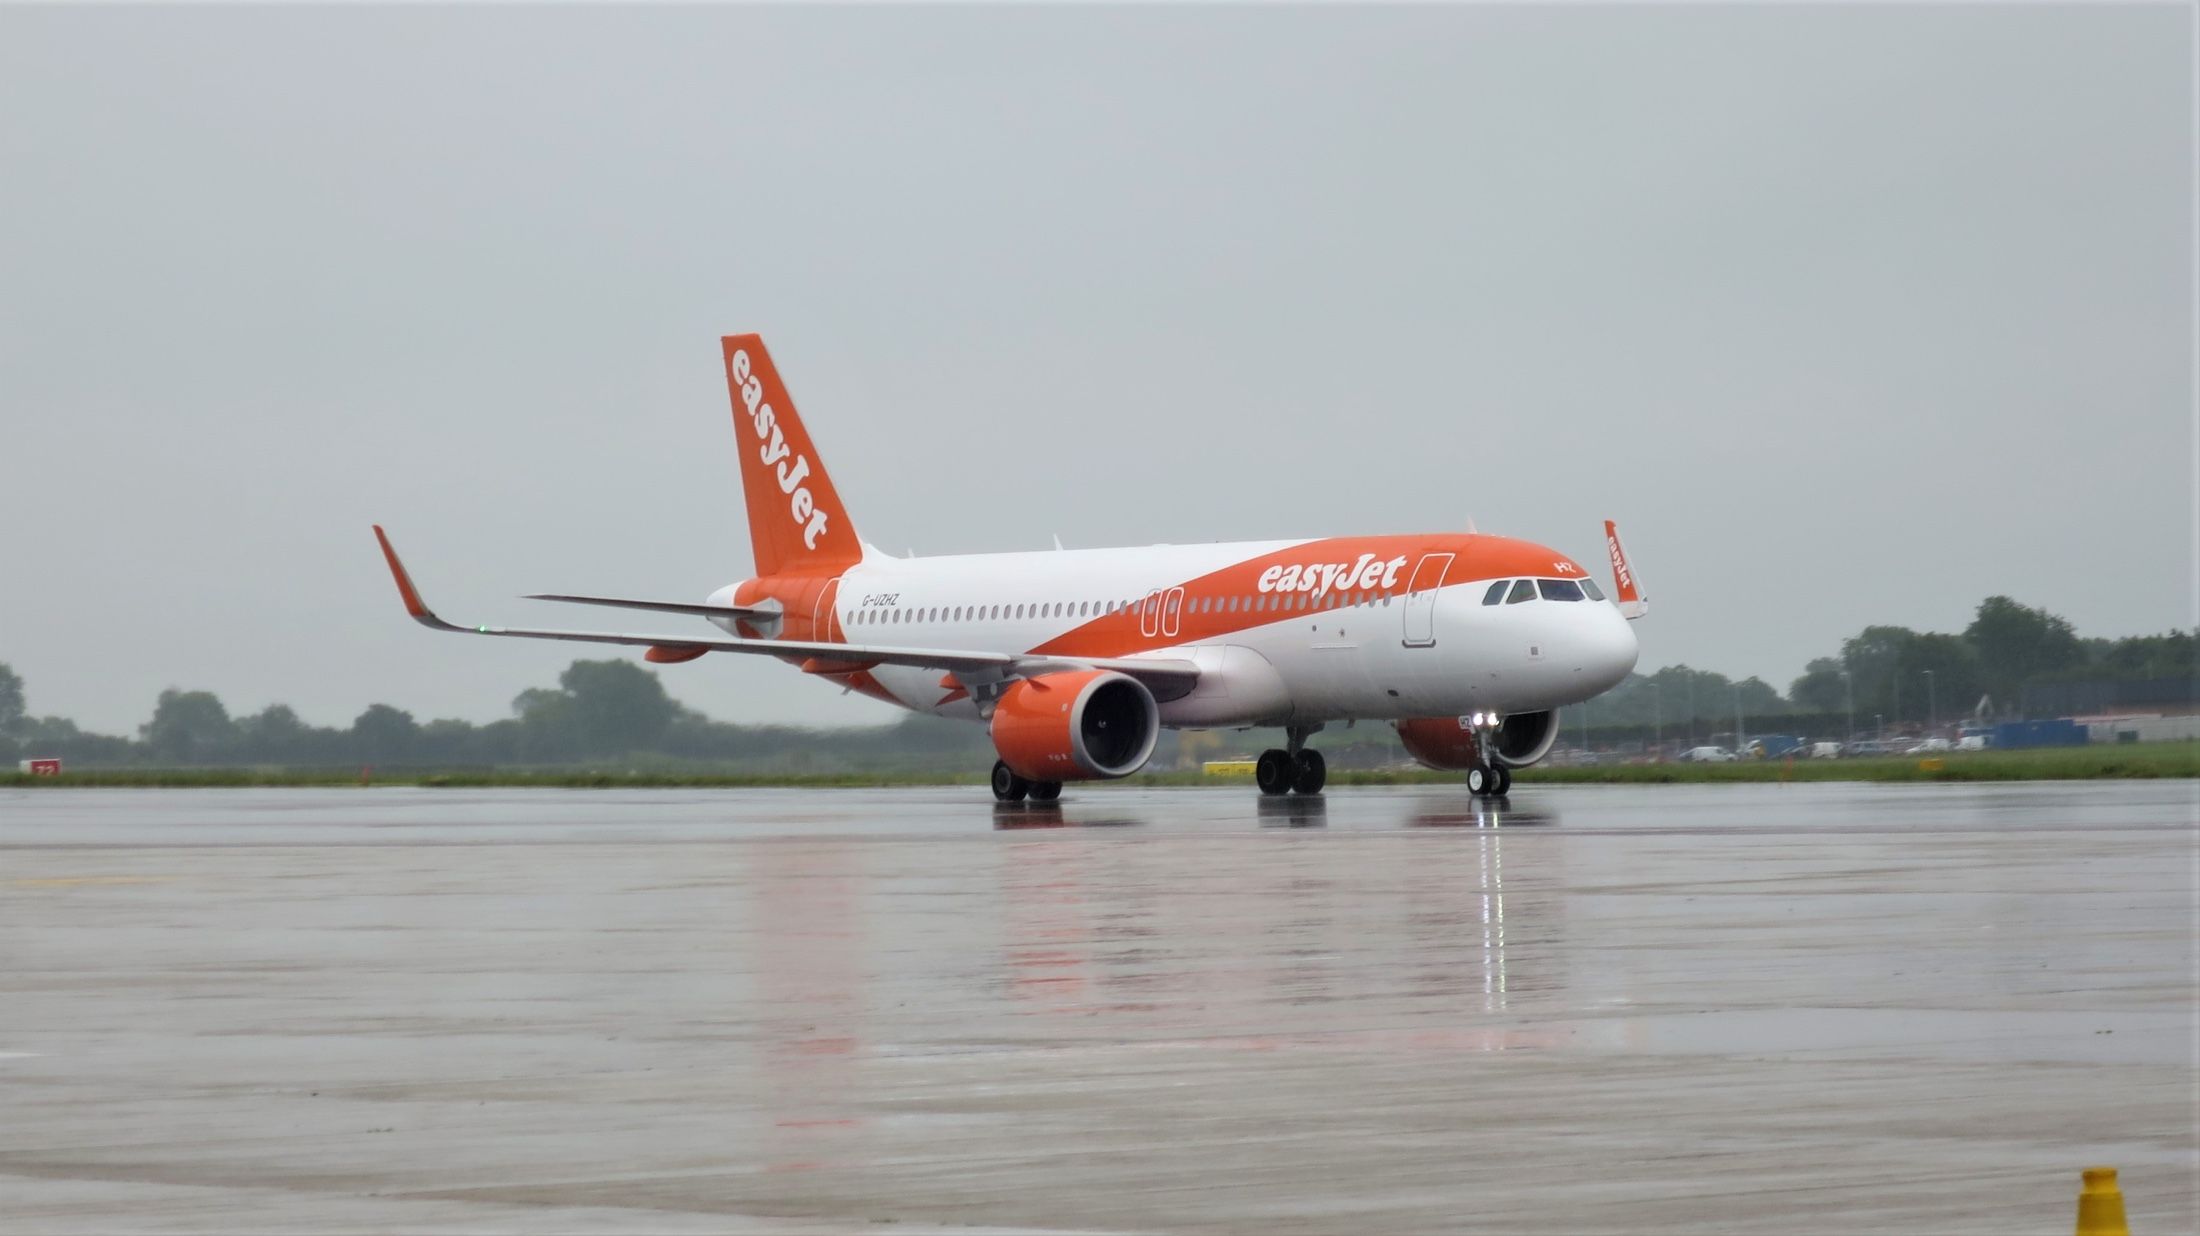 Easyjet A320 with blended winglets